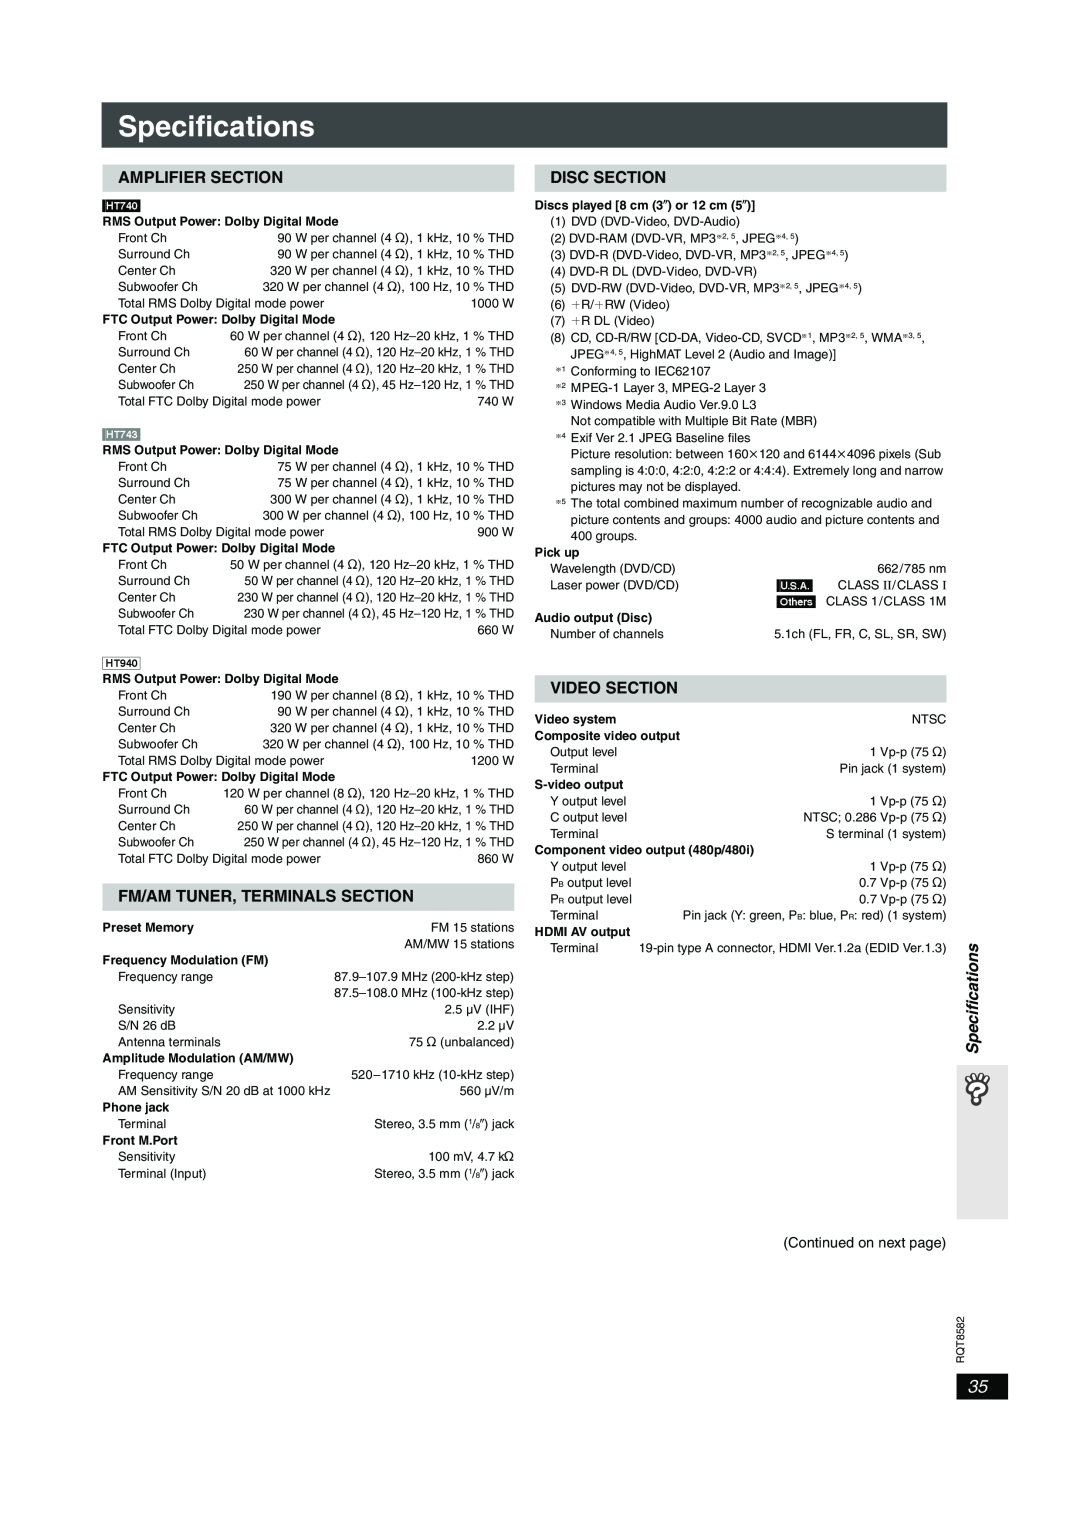 Panasonic SC-HT940 Specifications, HT740 &940En.bookPage35Friday,February24,2006, Amplifier Section, Disc Section, 7 47PM 